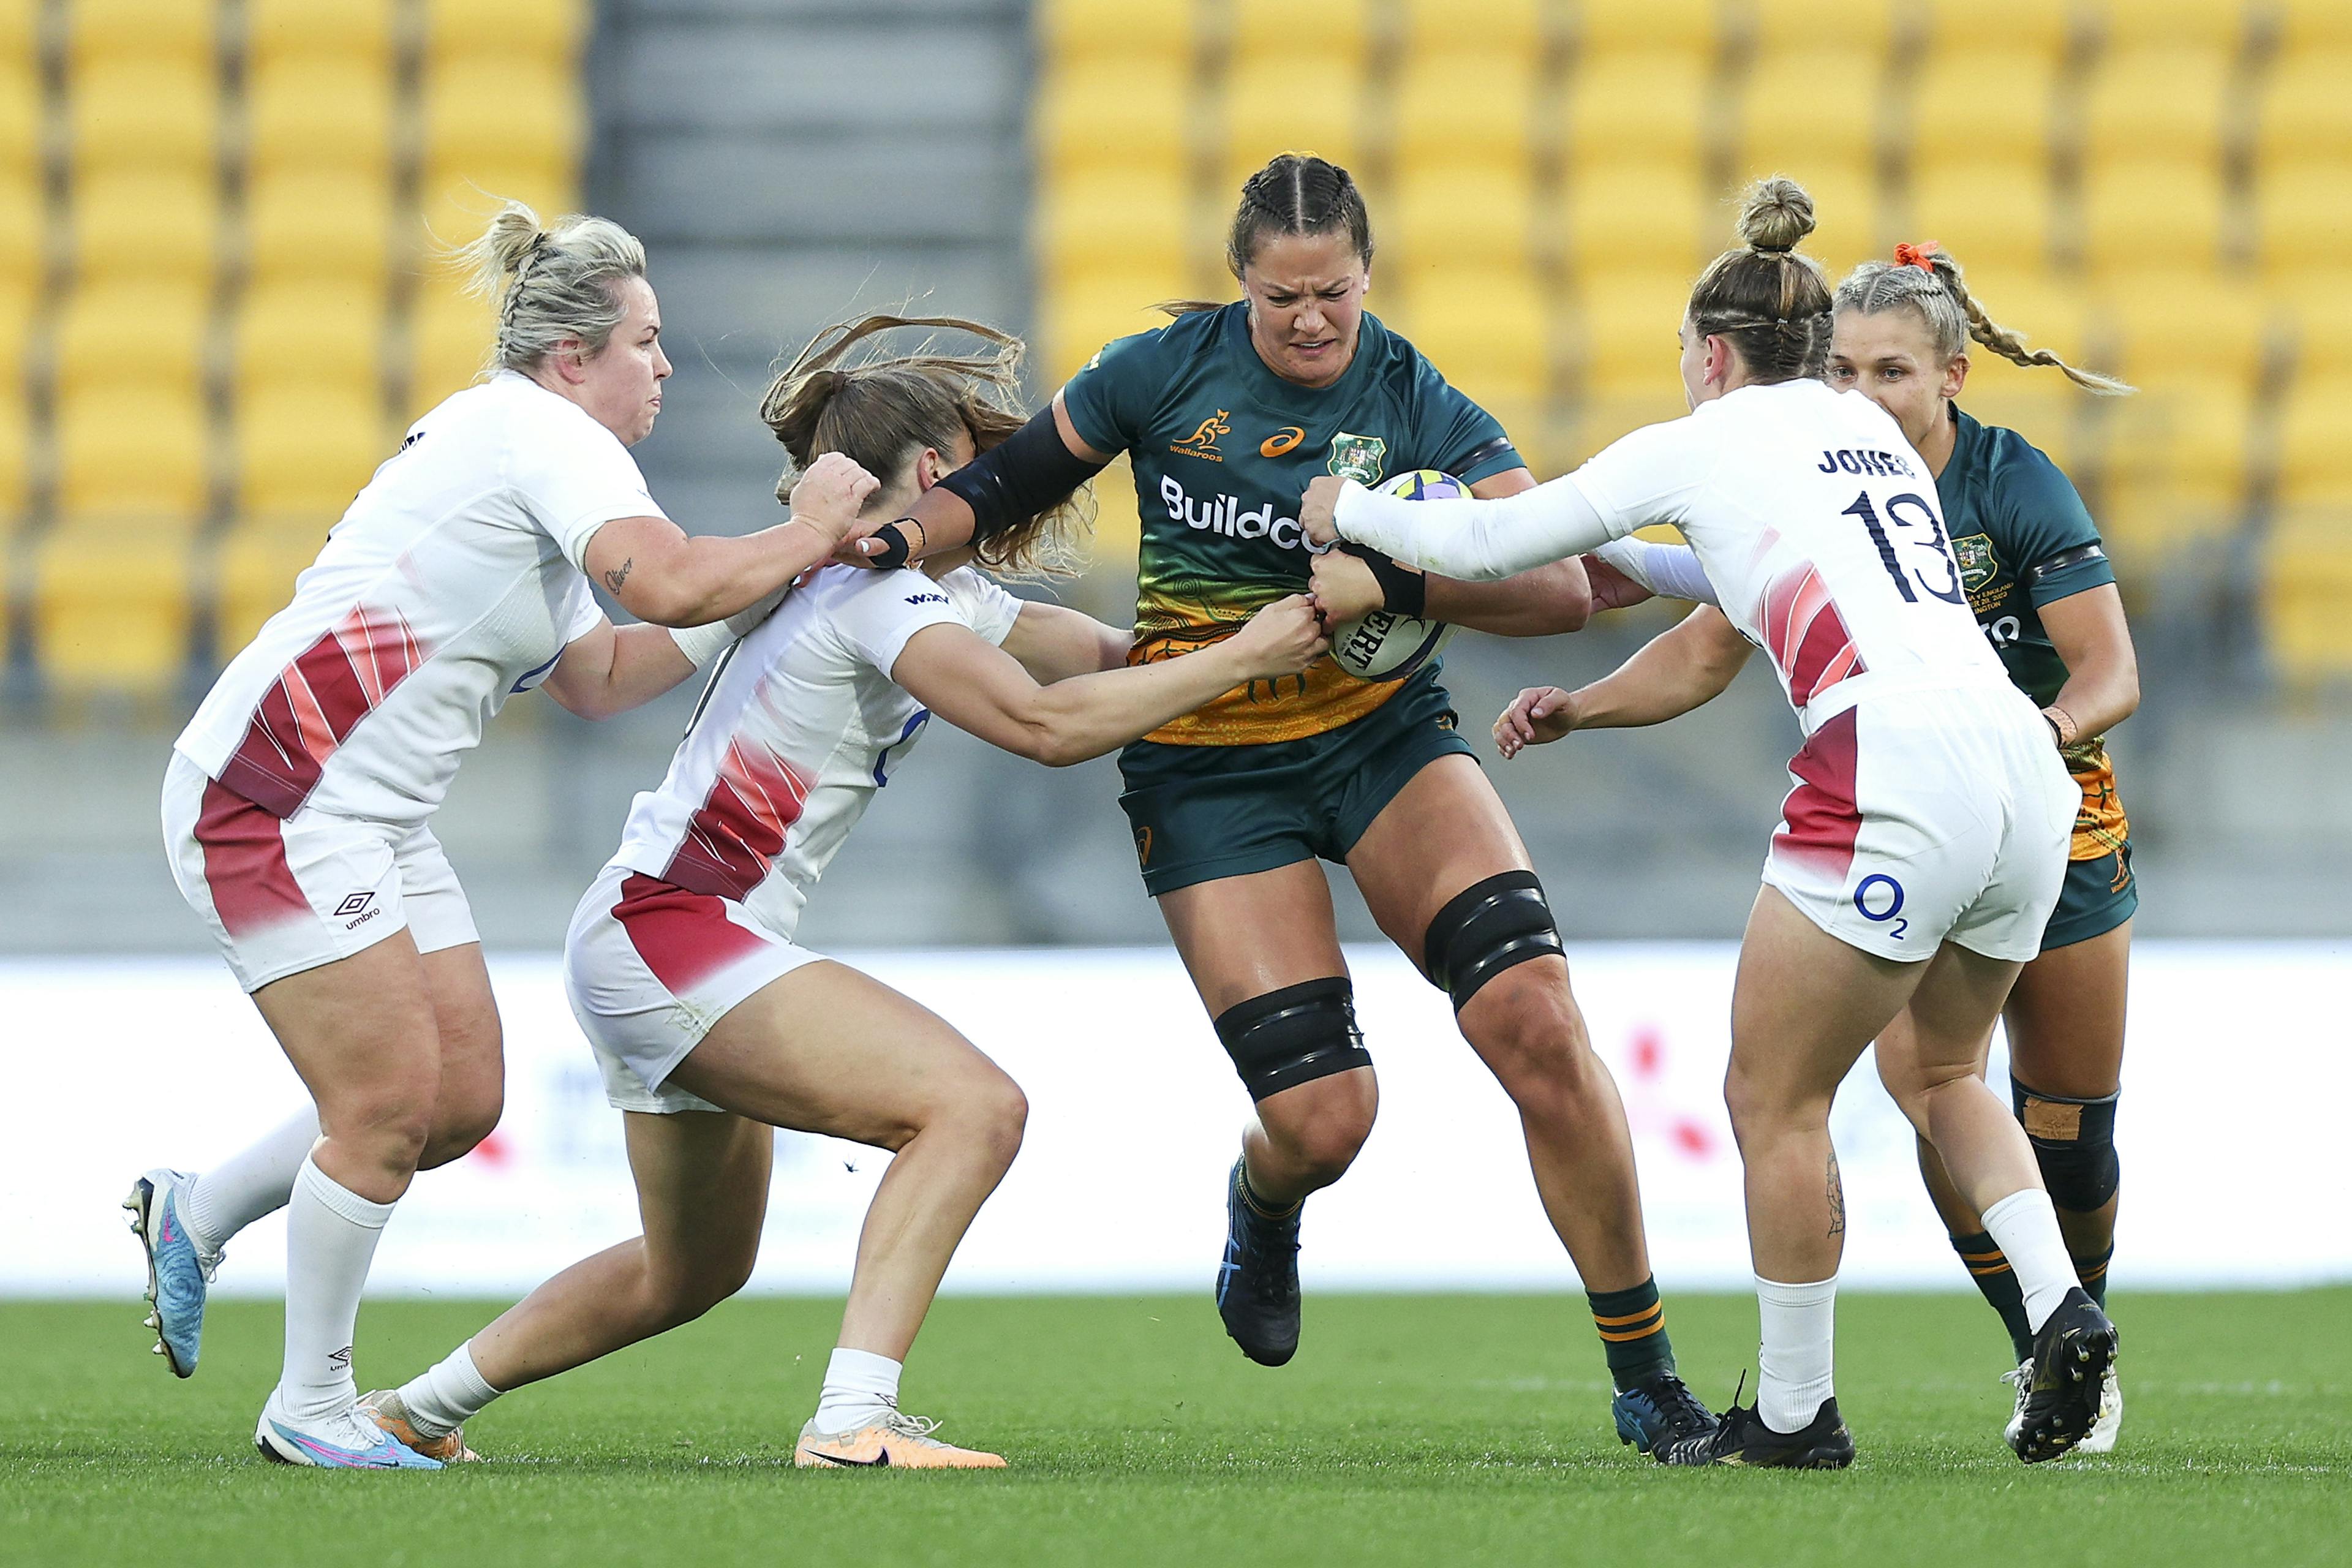 Wallaroos skipper Michaela Leonard takes on the English defence during Australia's WXV1 opener in Wellington. Picture: Getty